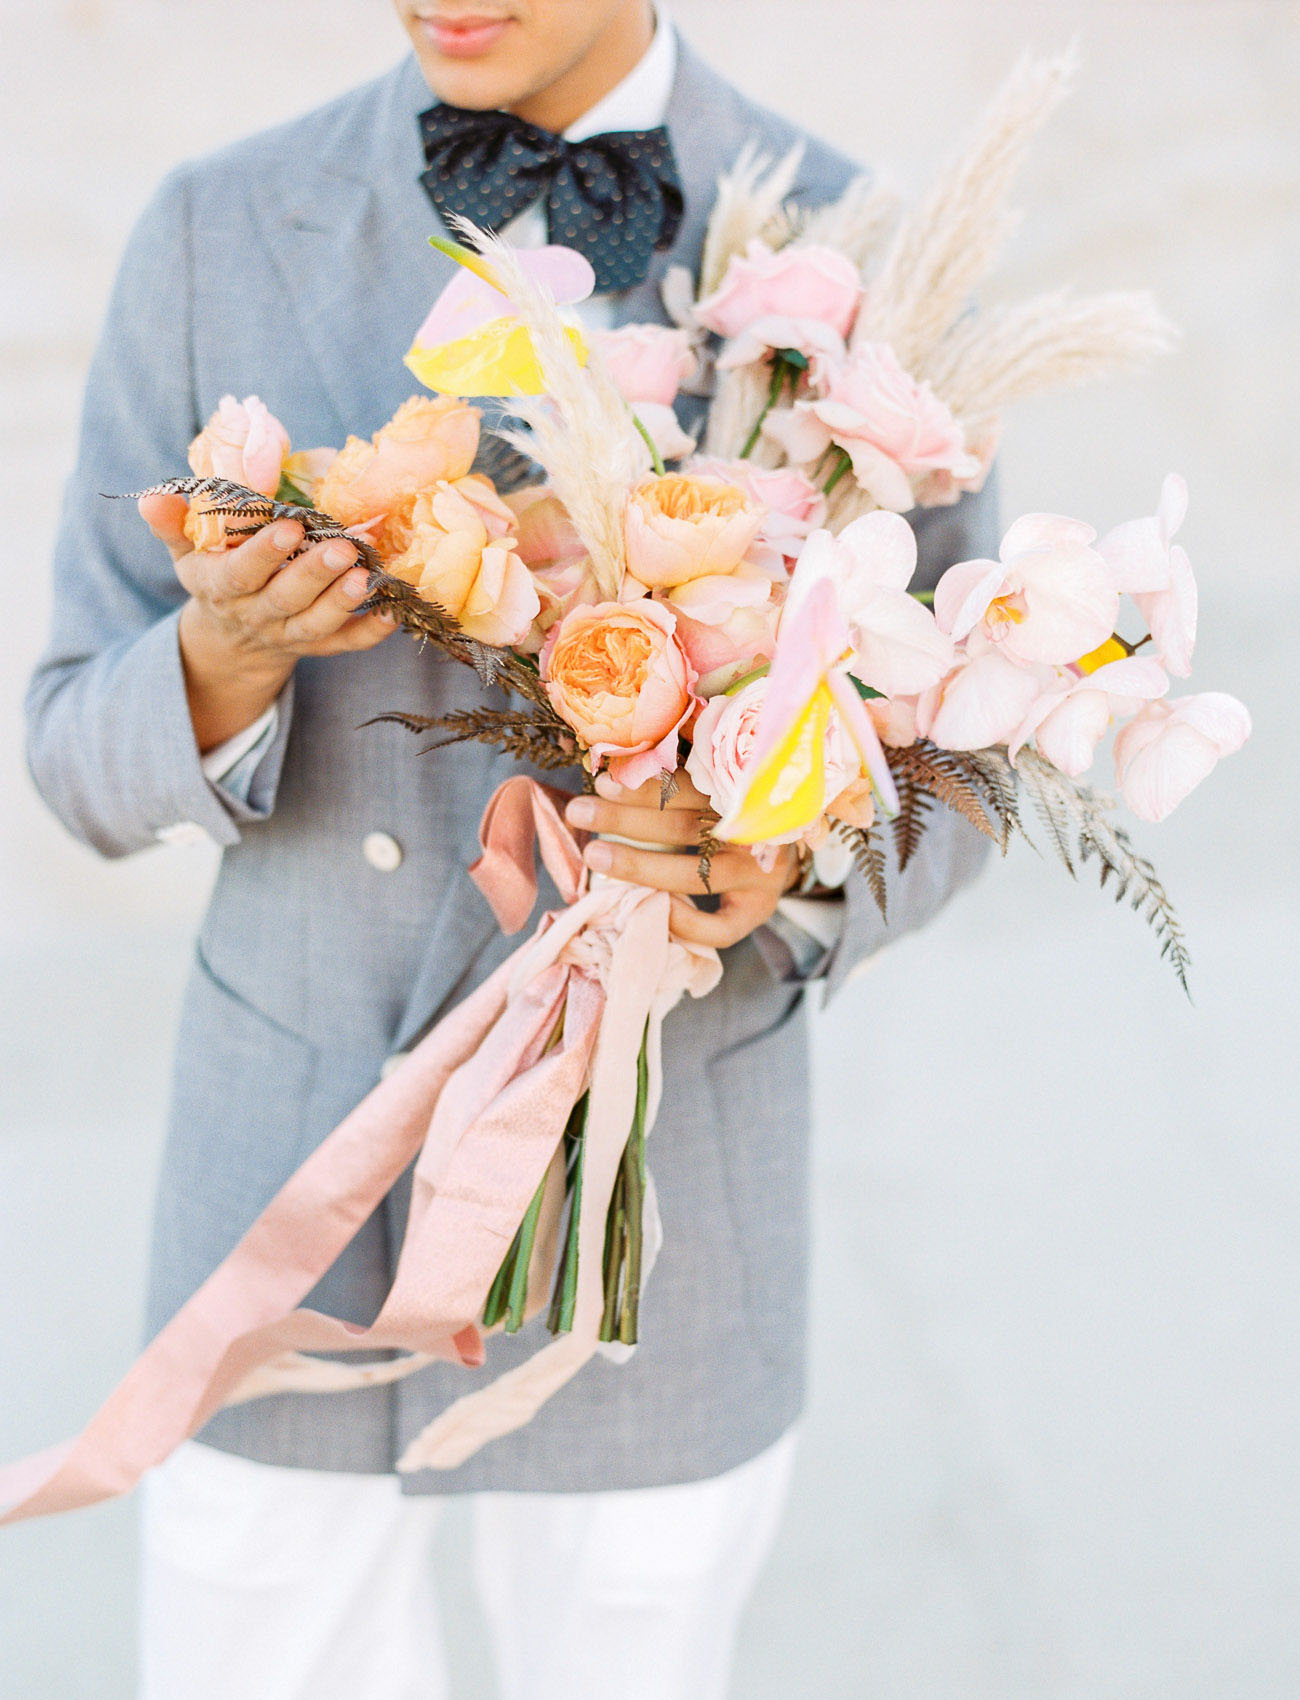 The wedding bouquet was romantic and pastel, with blush and peahcy blooms and pampas grass